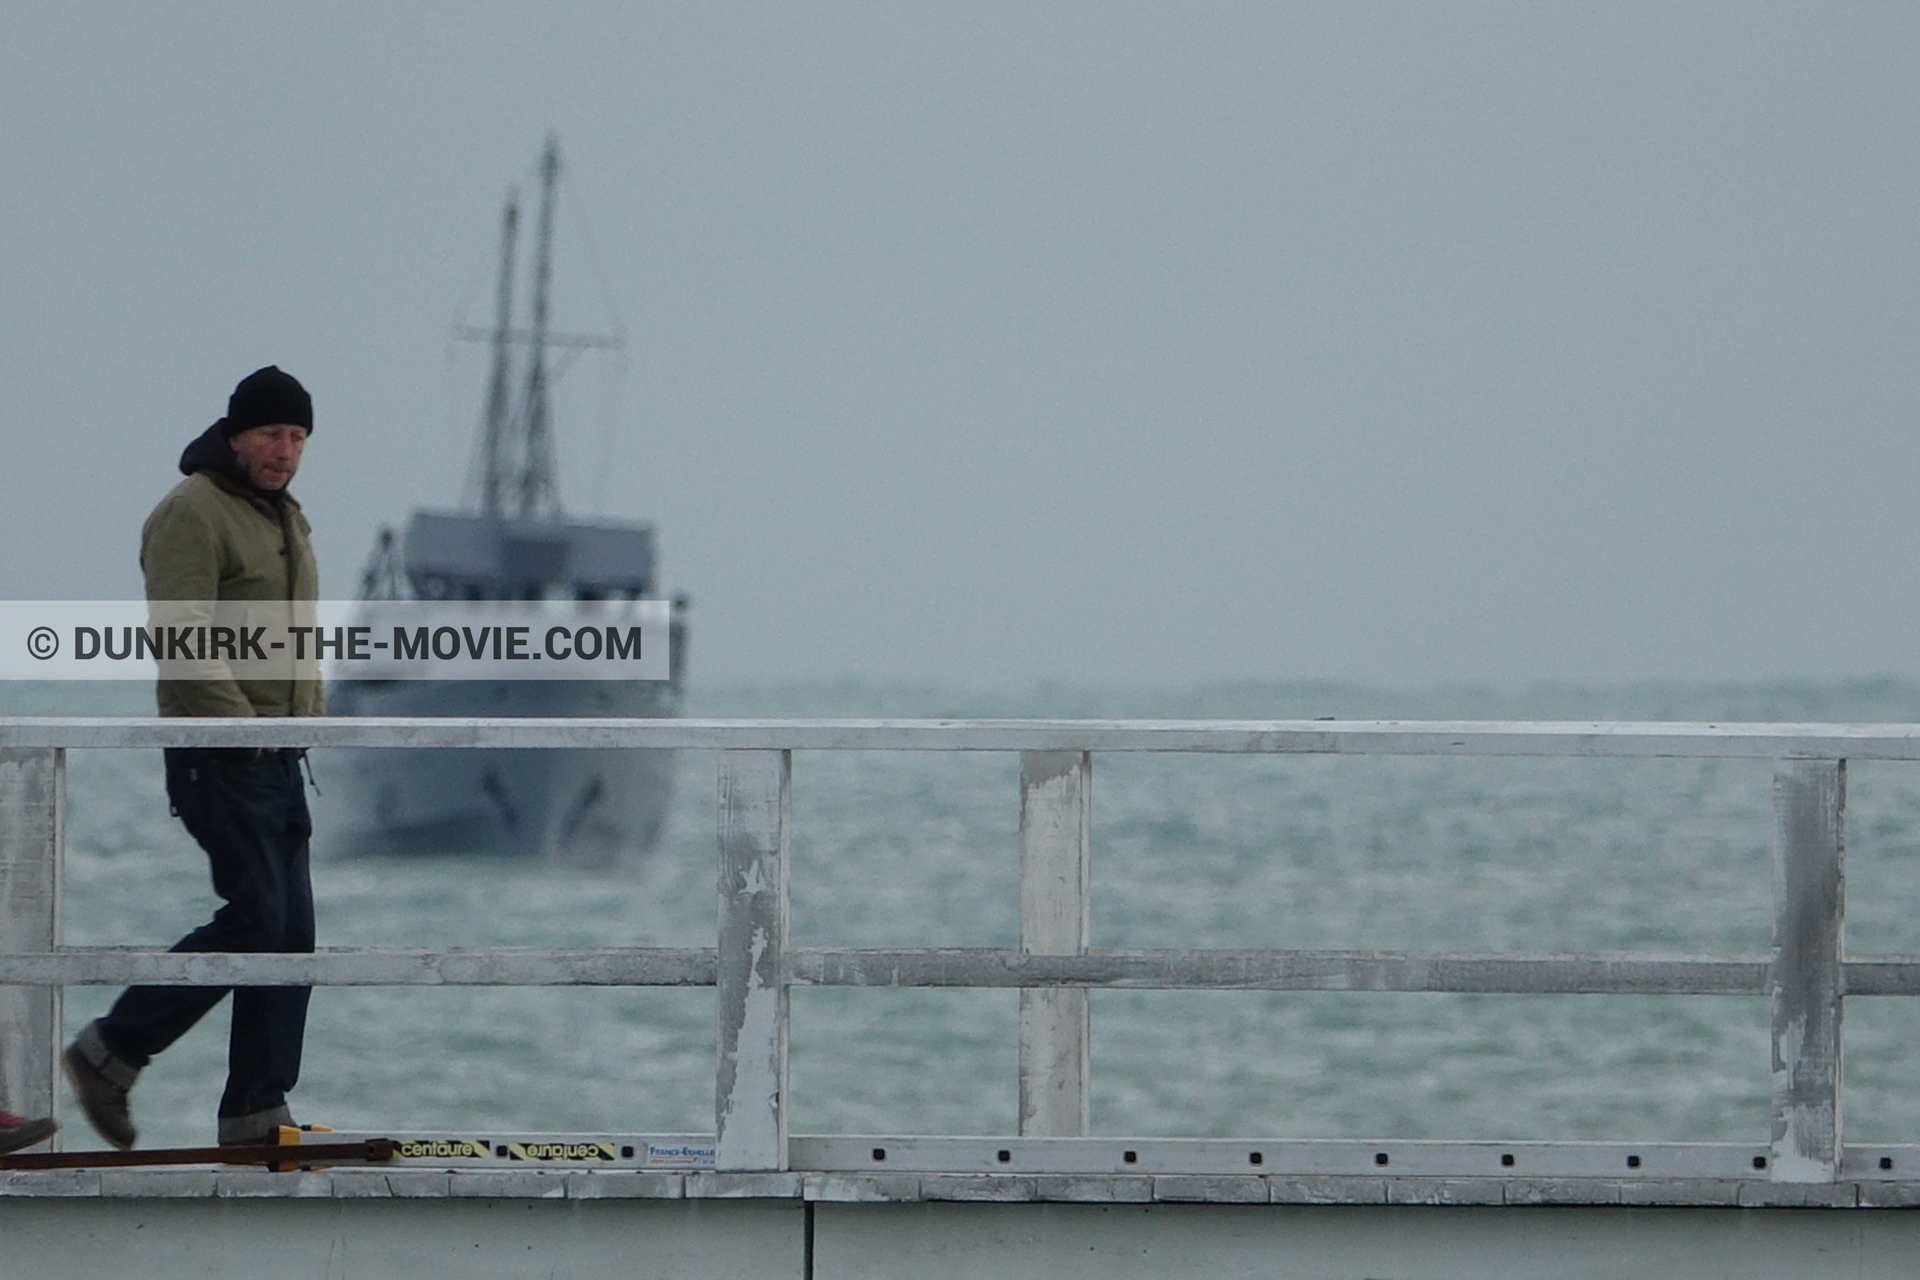 Picture with boat, grey sky, EST pier, technical team,  from behind the scene of the Dunkirk movie by Nolan